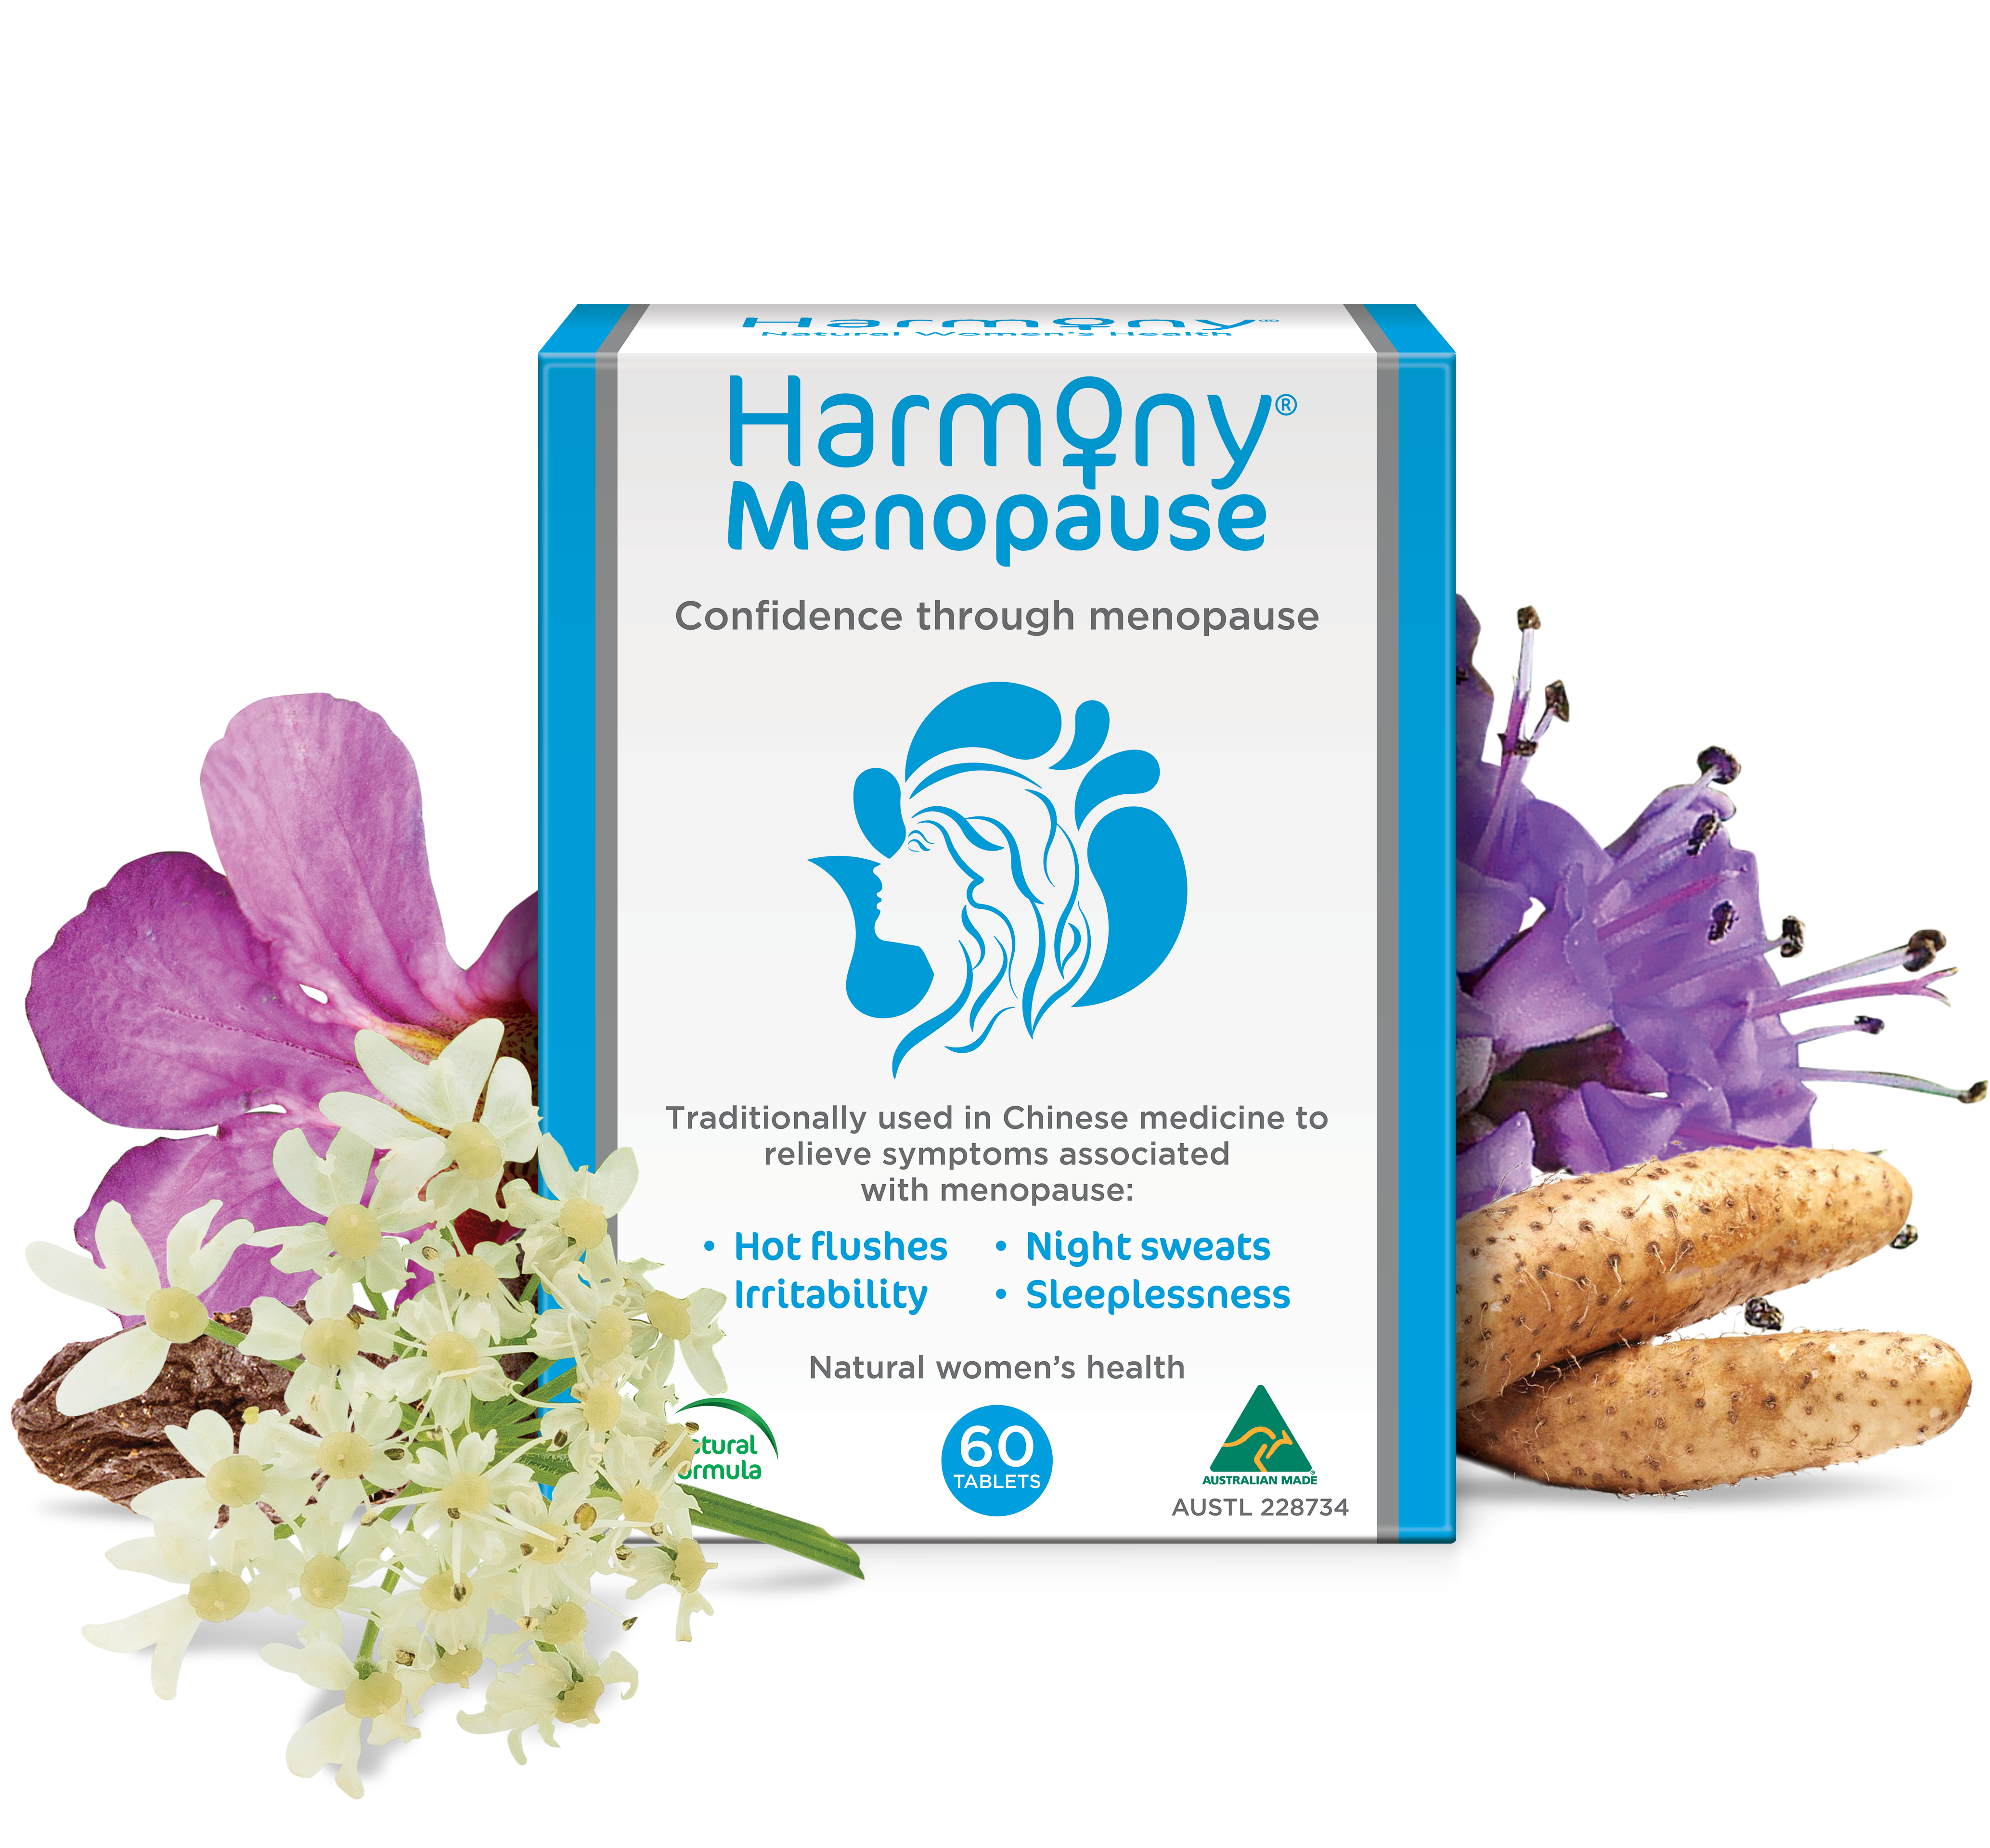 Homeopathic Harmony - Menopause symptoms.2 of 8 posts